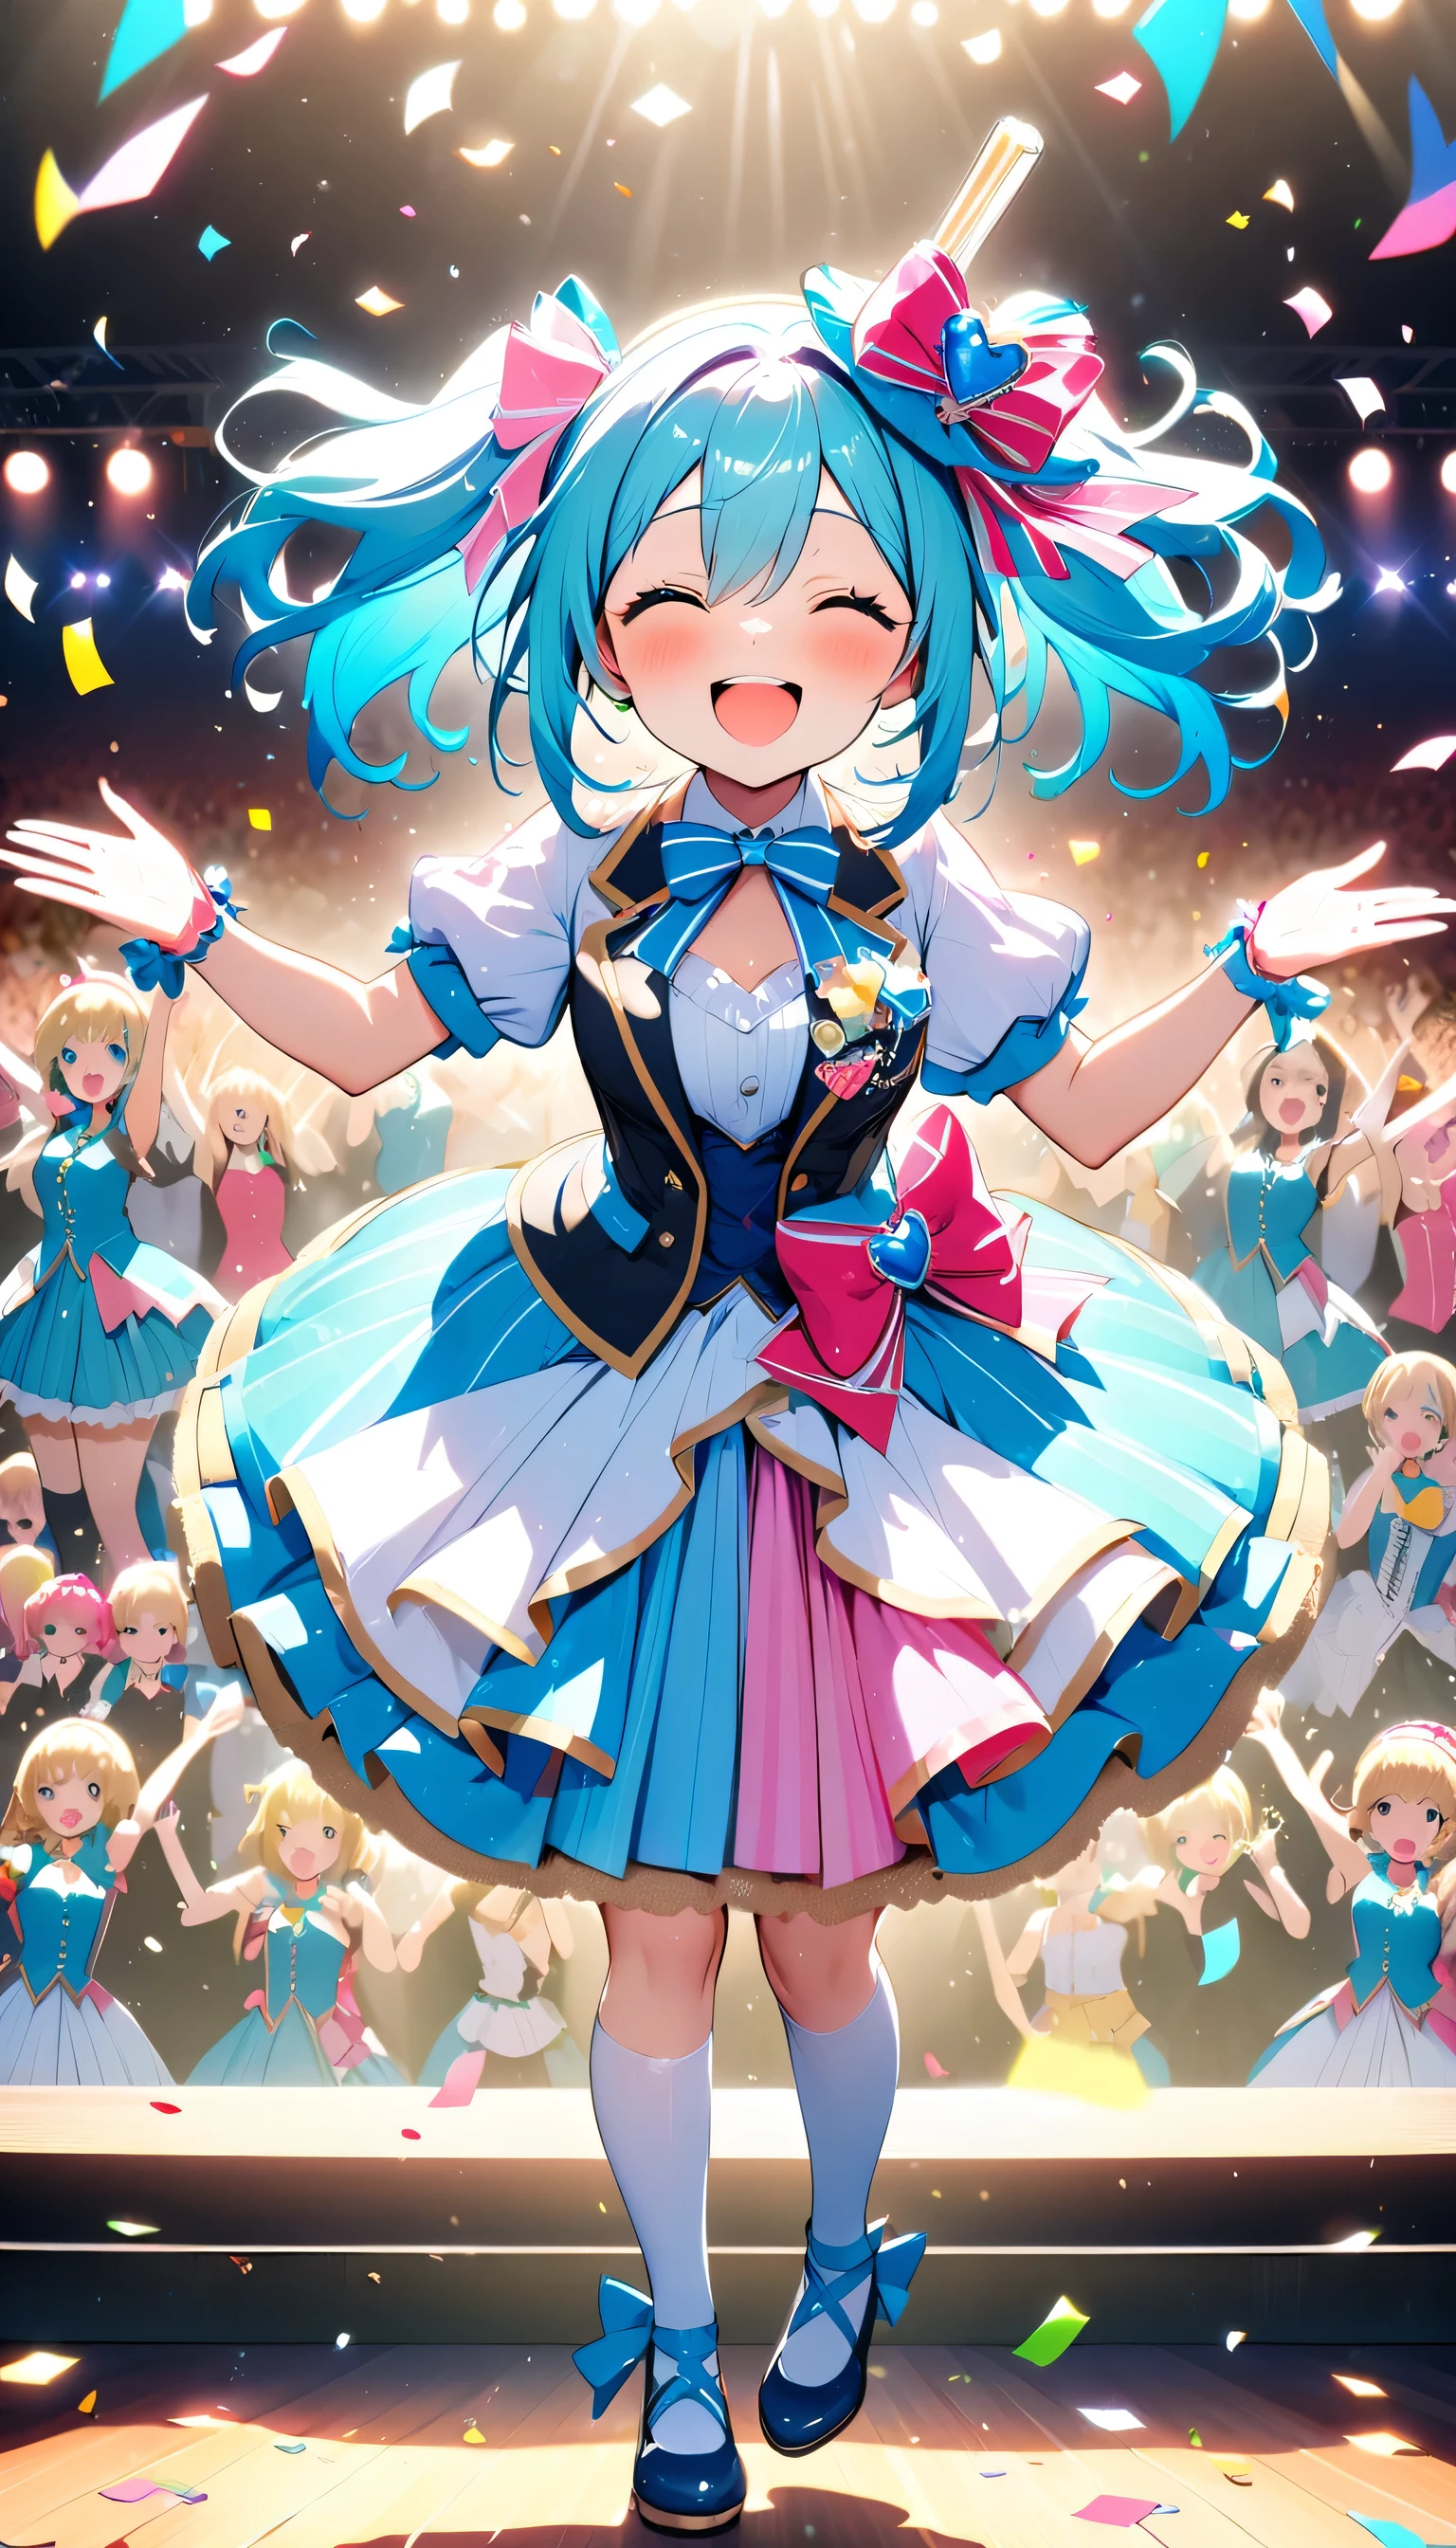 ((Idol Concert)),((Confetti)),Smile at the audience,Perfect Face,cute,dance,Please raise your hand,Scene of the concert venue,masterpiece,highest quality,Pop and fancy idol costumes,cute,fun,happiness,,Stylish scenery,22.2 Shine,celebration,Anatomically correct,all the best,Consciousness upward,,((Confetti)),Shine,star,Light,Sequins,,lame,,BRAKE,A concert themed around Alice in Wonderland,Characters,Cosplay,Alice,flash,